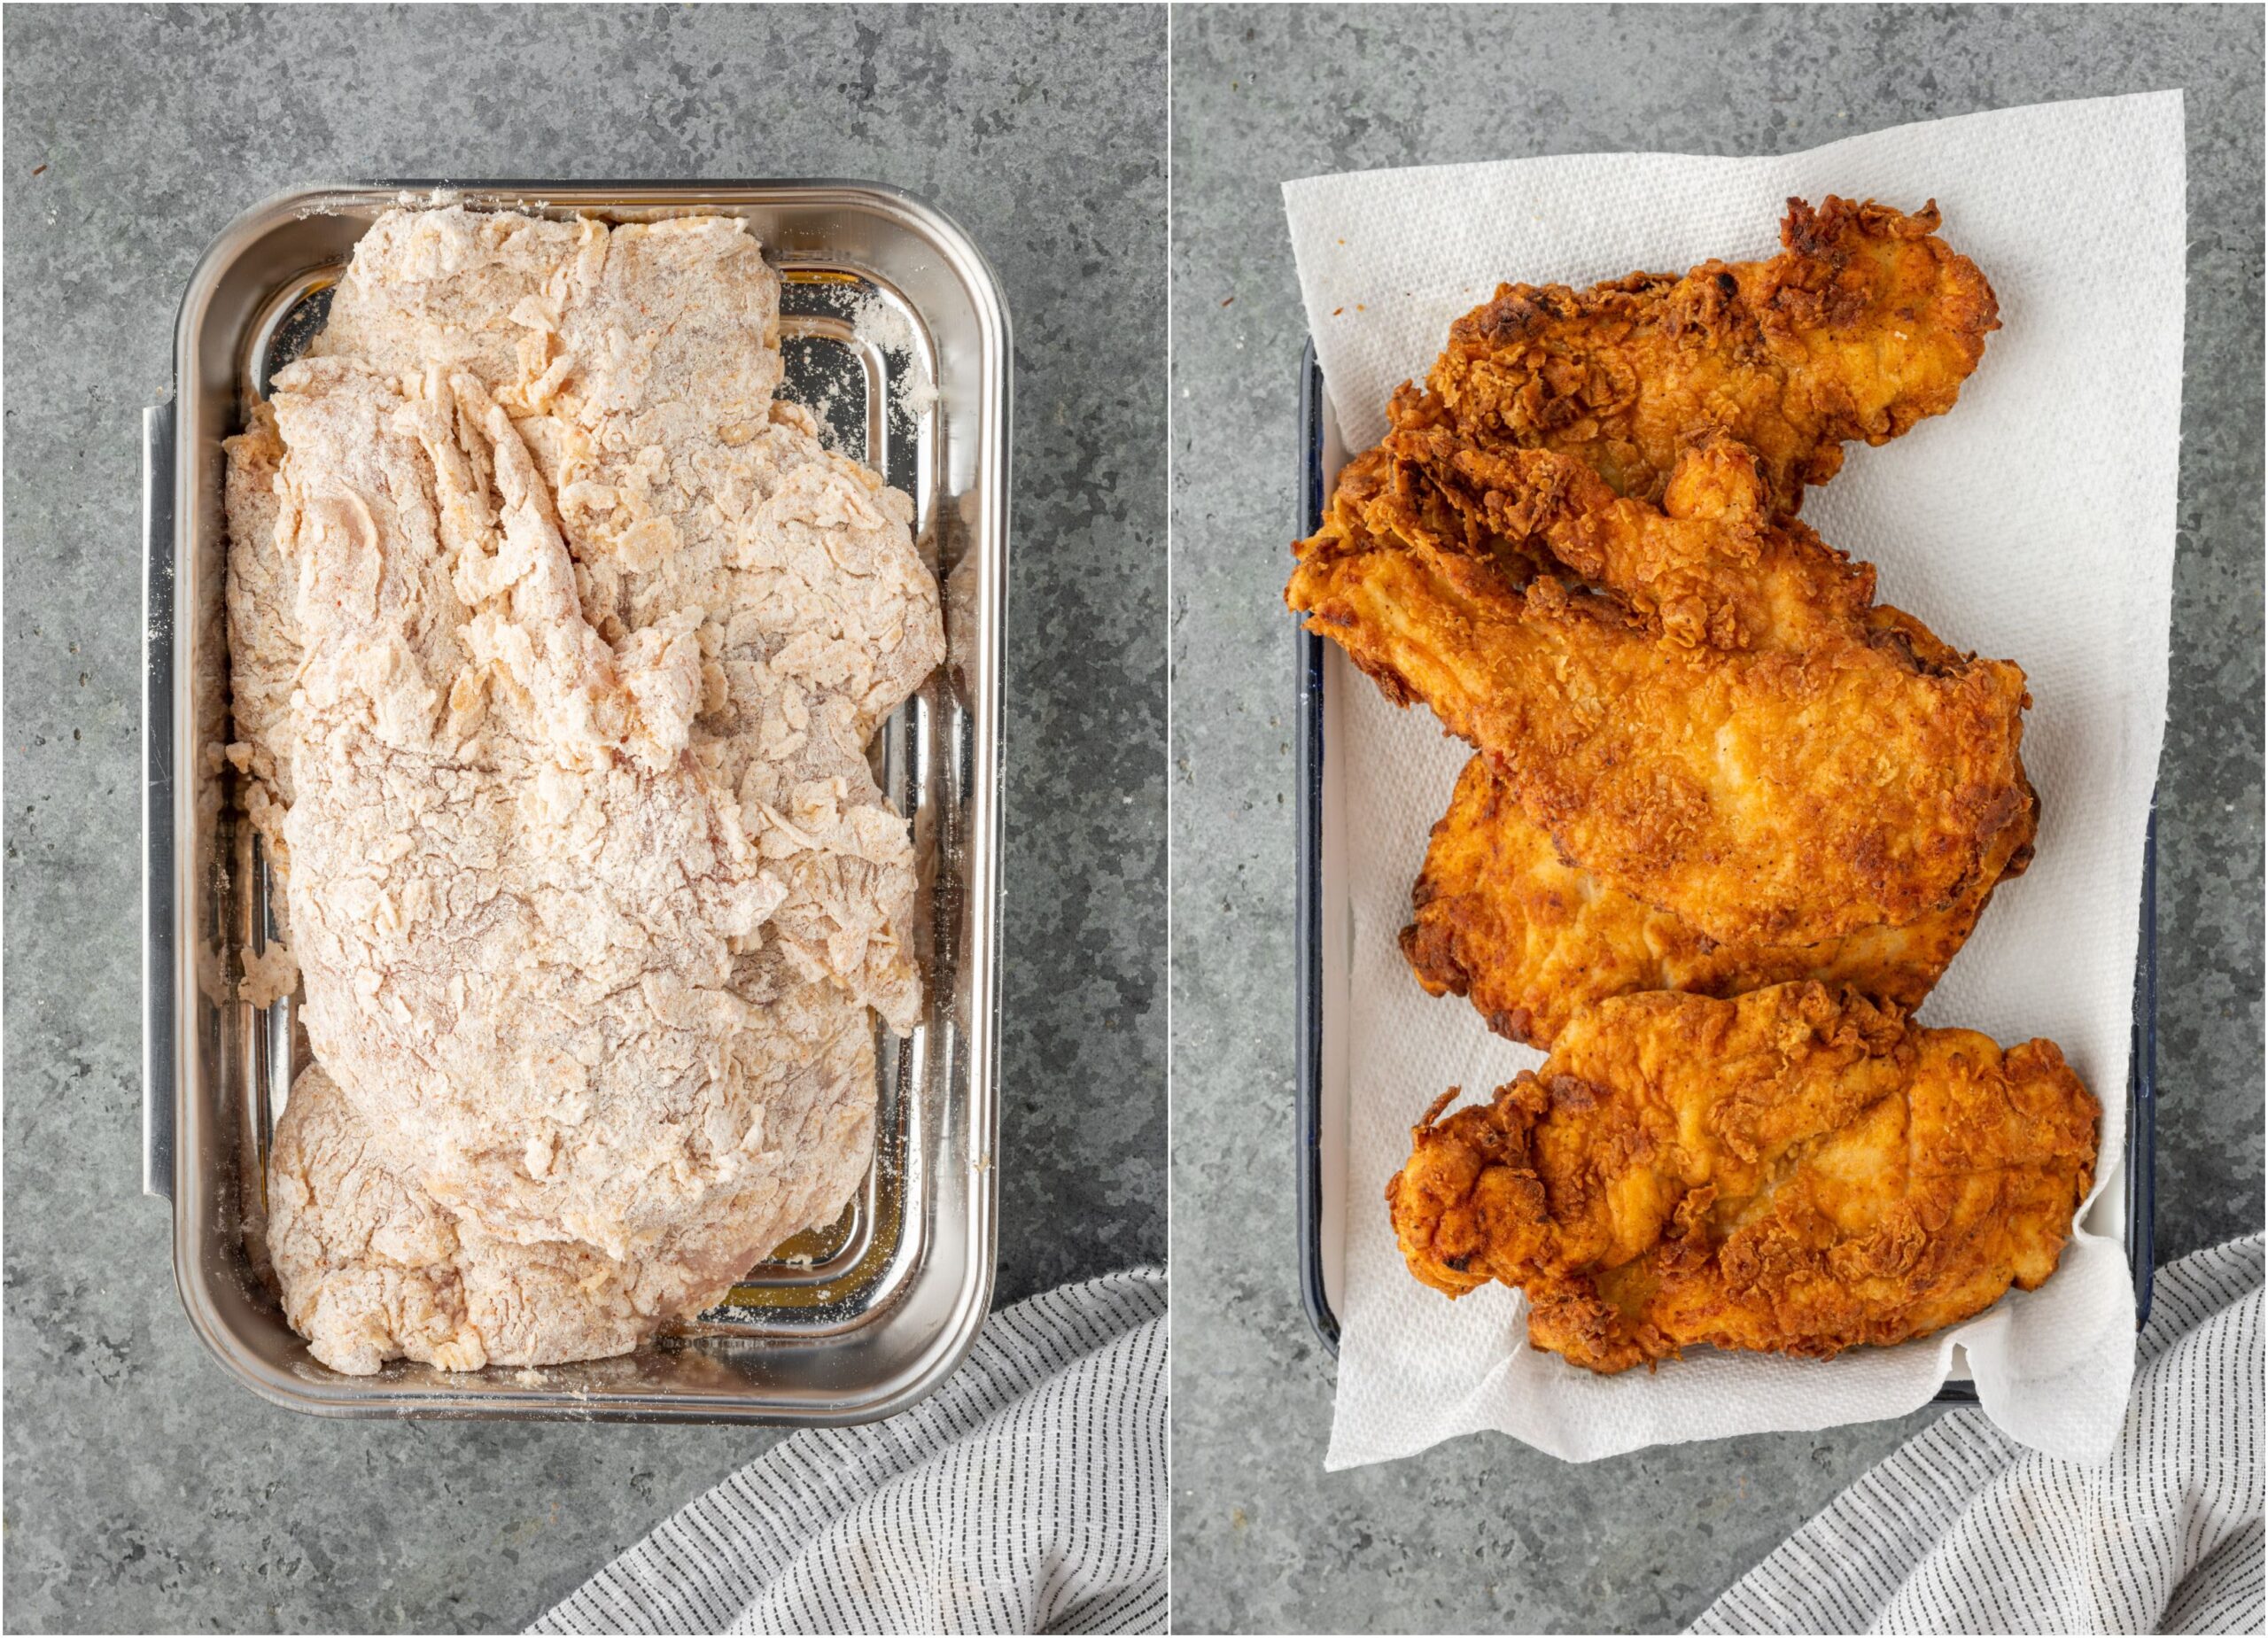 Dredging chicken breasts in flour mixture and cooked crispy chicken.